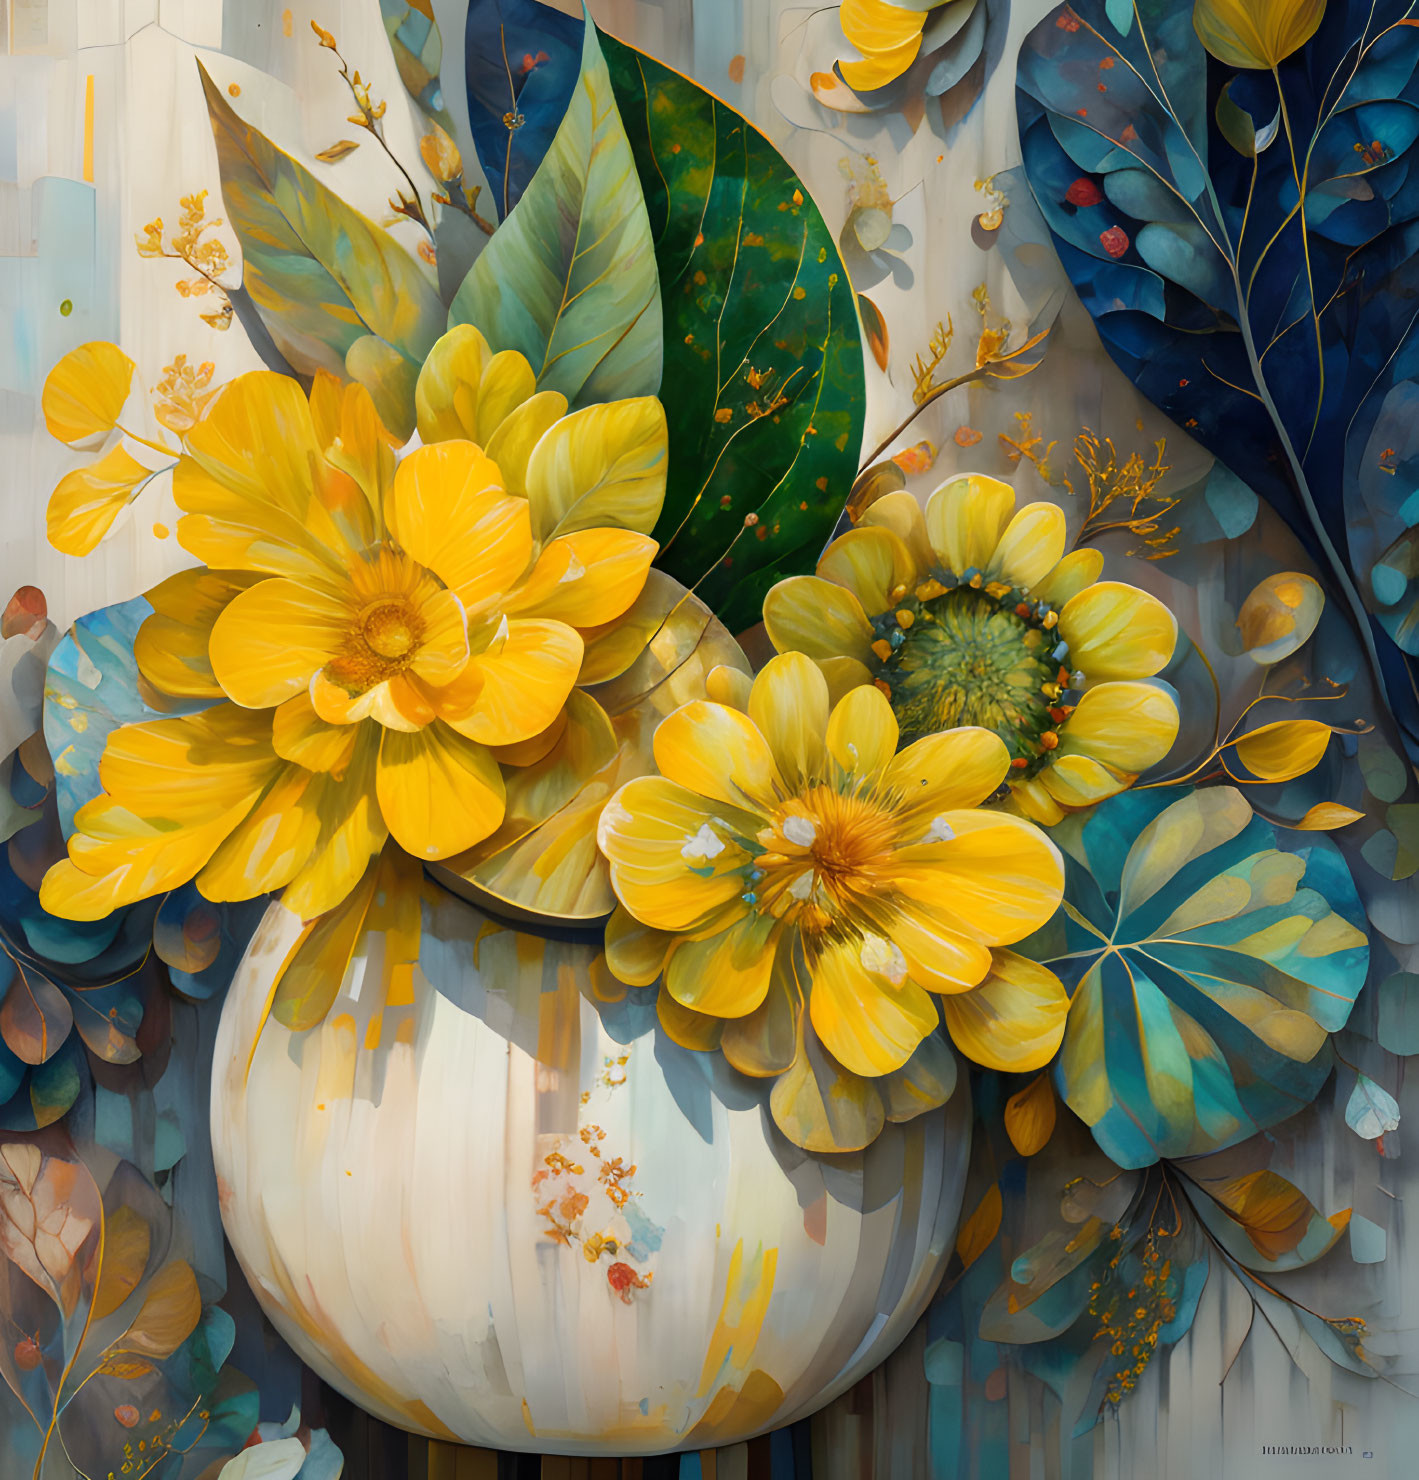 Vibrant painting of golden yellow flowers in a white vase surrounded by lush green and blue foliage